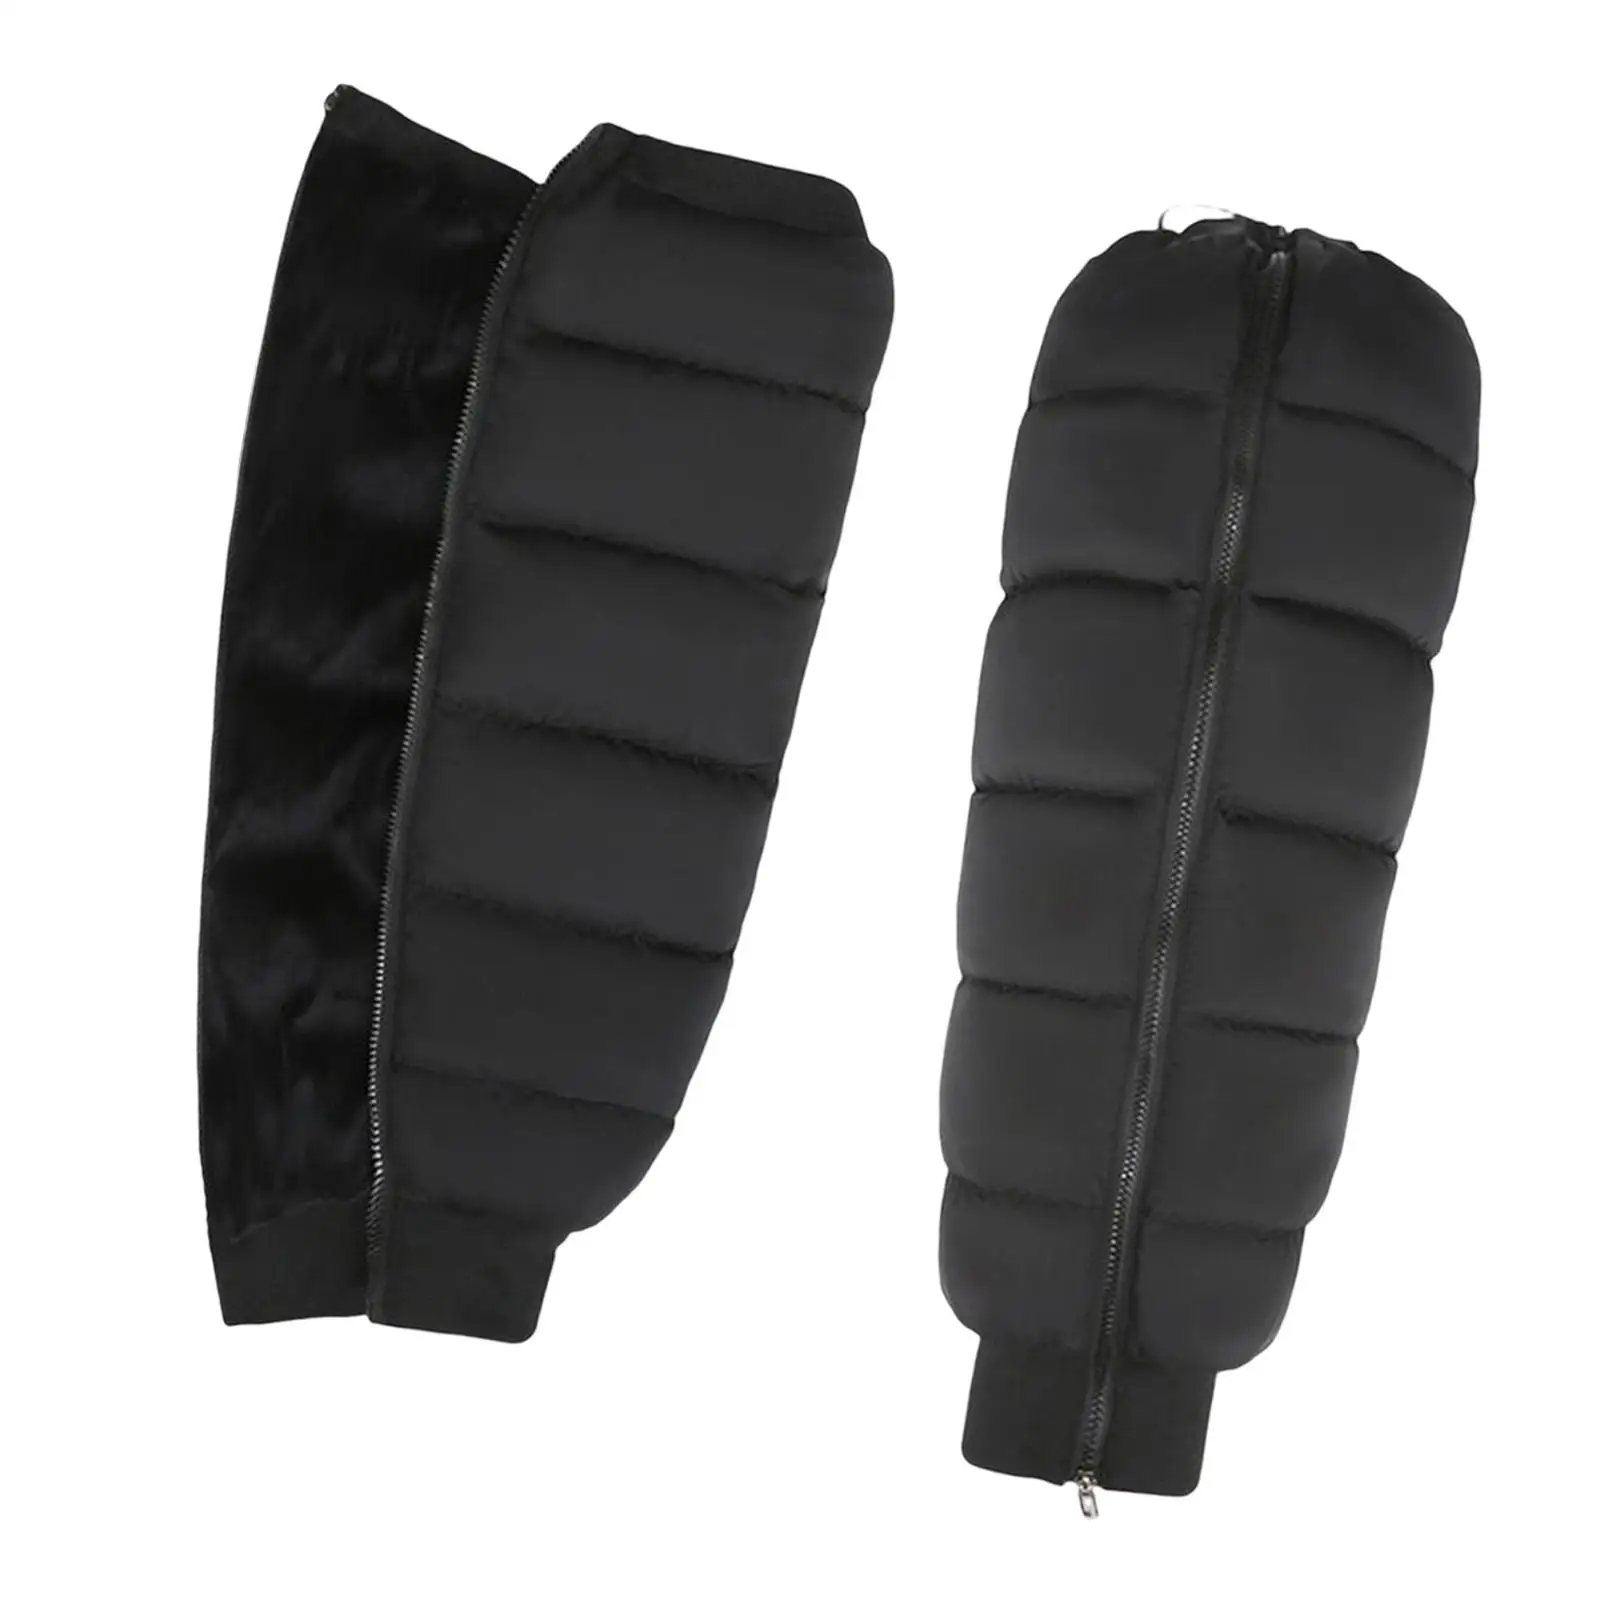 2 Packs Motorcycle Knee Pads Windproof Protective Gear for Cold Weather